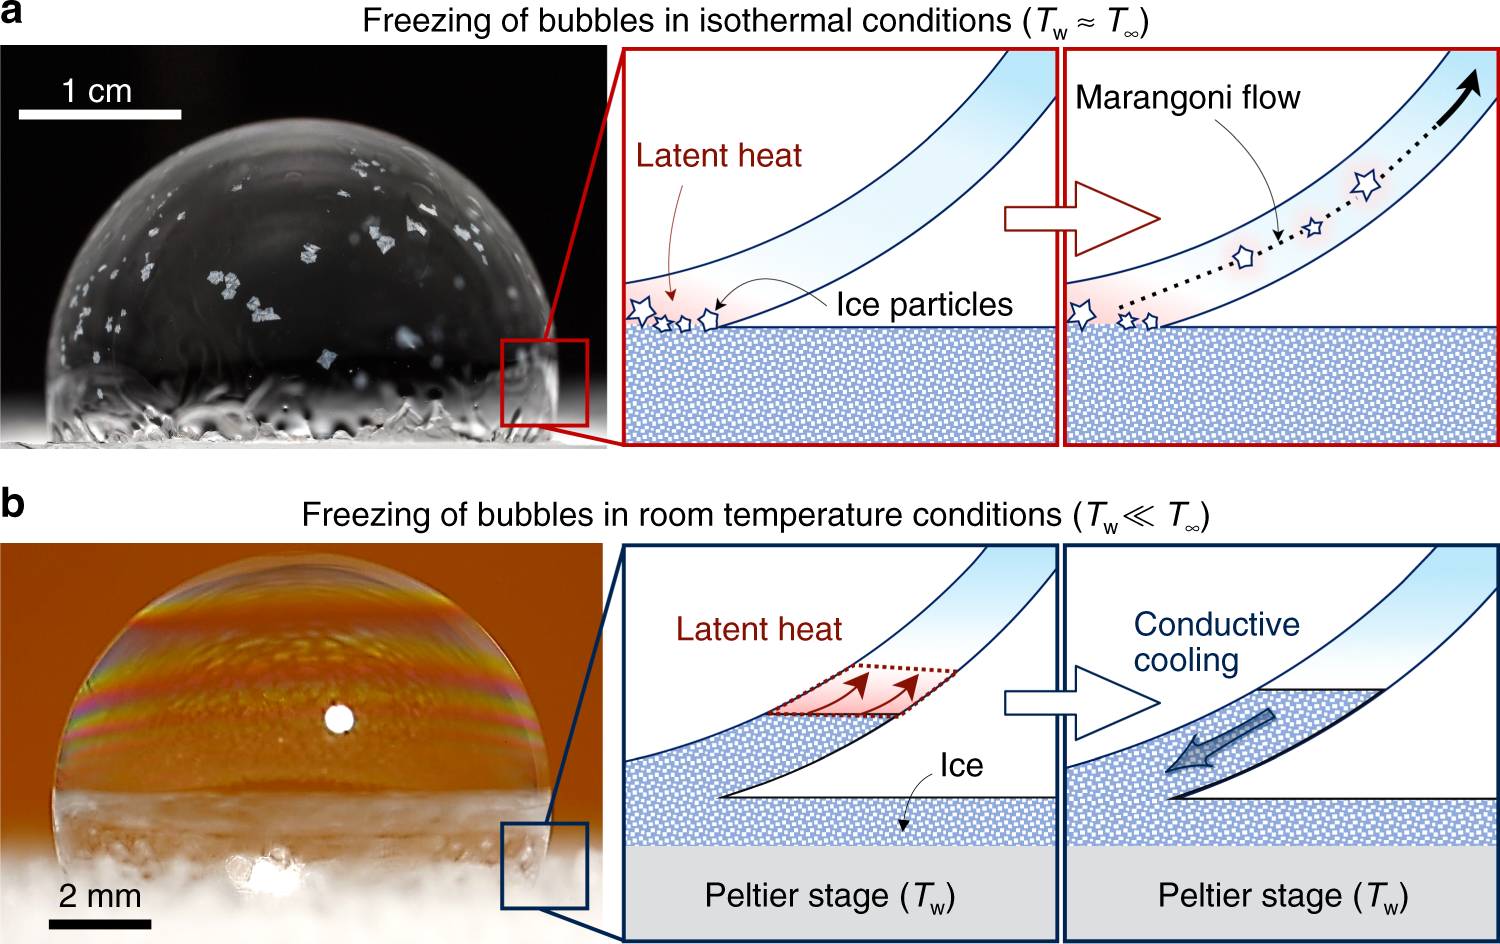 The dynamics of freezing bubbles: a For bubbles                  deposited on an icy substrate contained within an                  isothermal freezer, the freeze front induced local                  heating at the bottom of the bubble. This resulted in a                  Marangoni flow strong enough to detach and entrain                  growing ice crystals, such that the bubble froze from                  multiple=